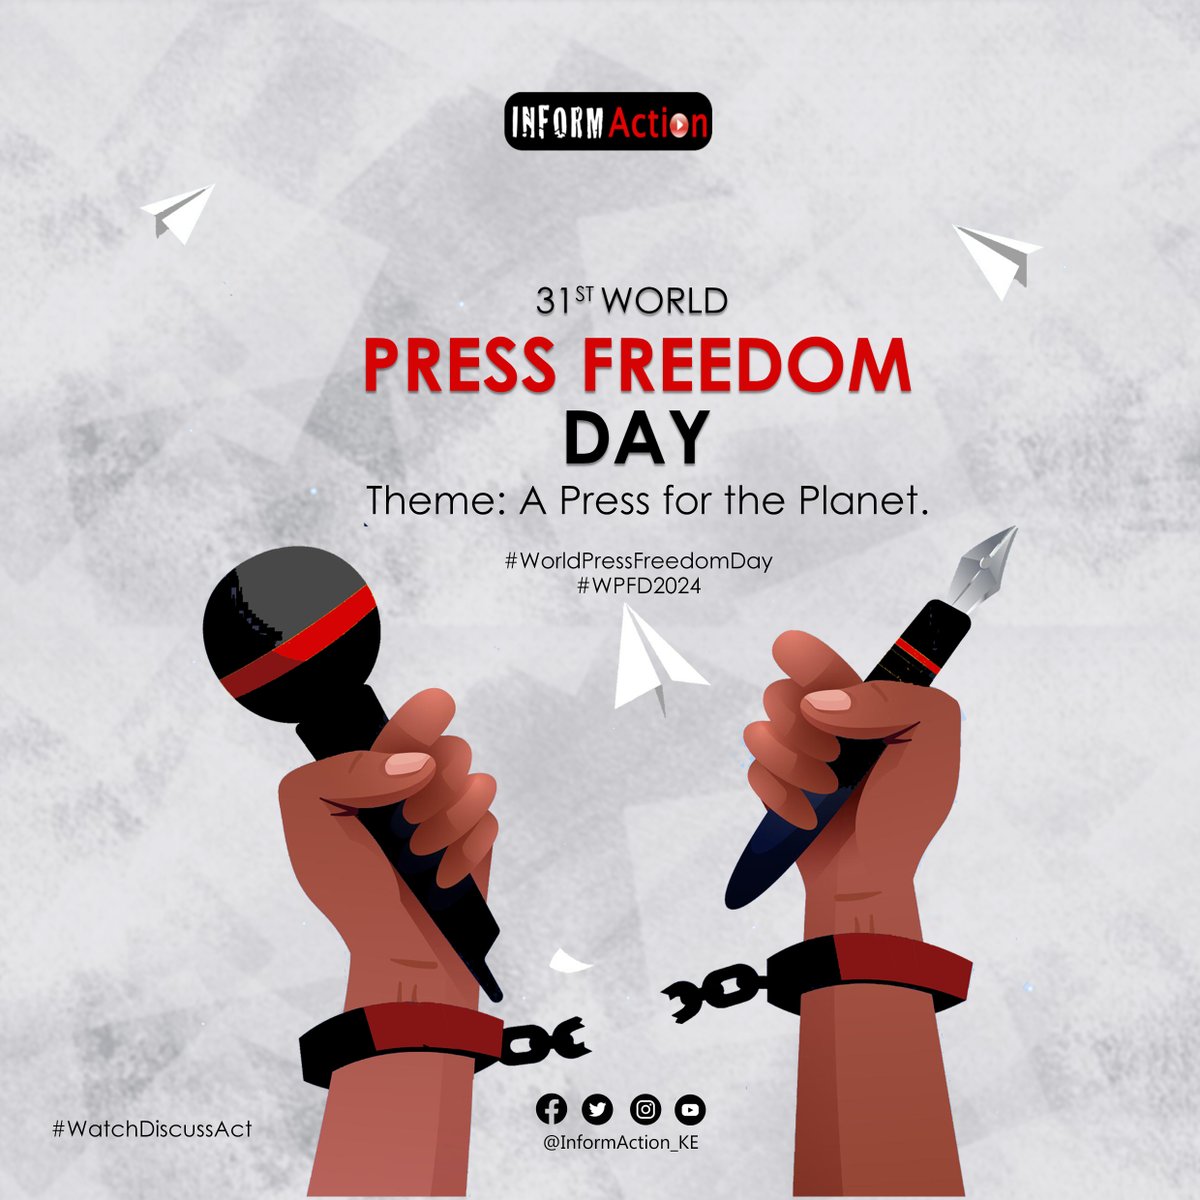 As we mark #WorldPressFreedomDay, let's remember that a free press is essential for environmental protection. Journalists shine a light on environmental issues, from climate change to pollution, driving public awareness and action. #WPFD2024 #WatchDiscussAct